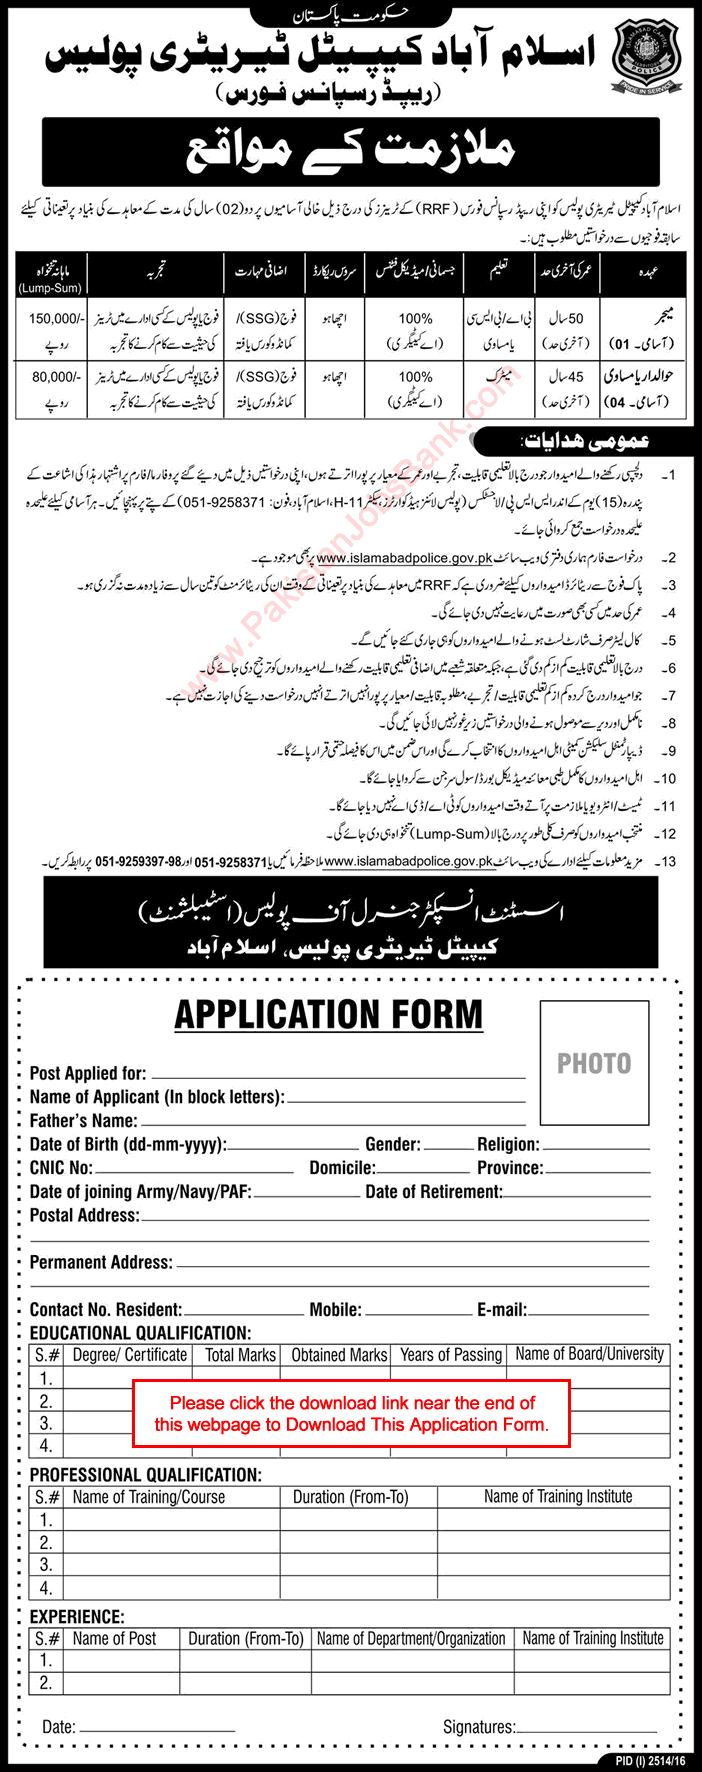 Islamabad Police Jobs November 2016 Application Form for Ex/Retired Army Personnel in RRF Latest